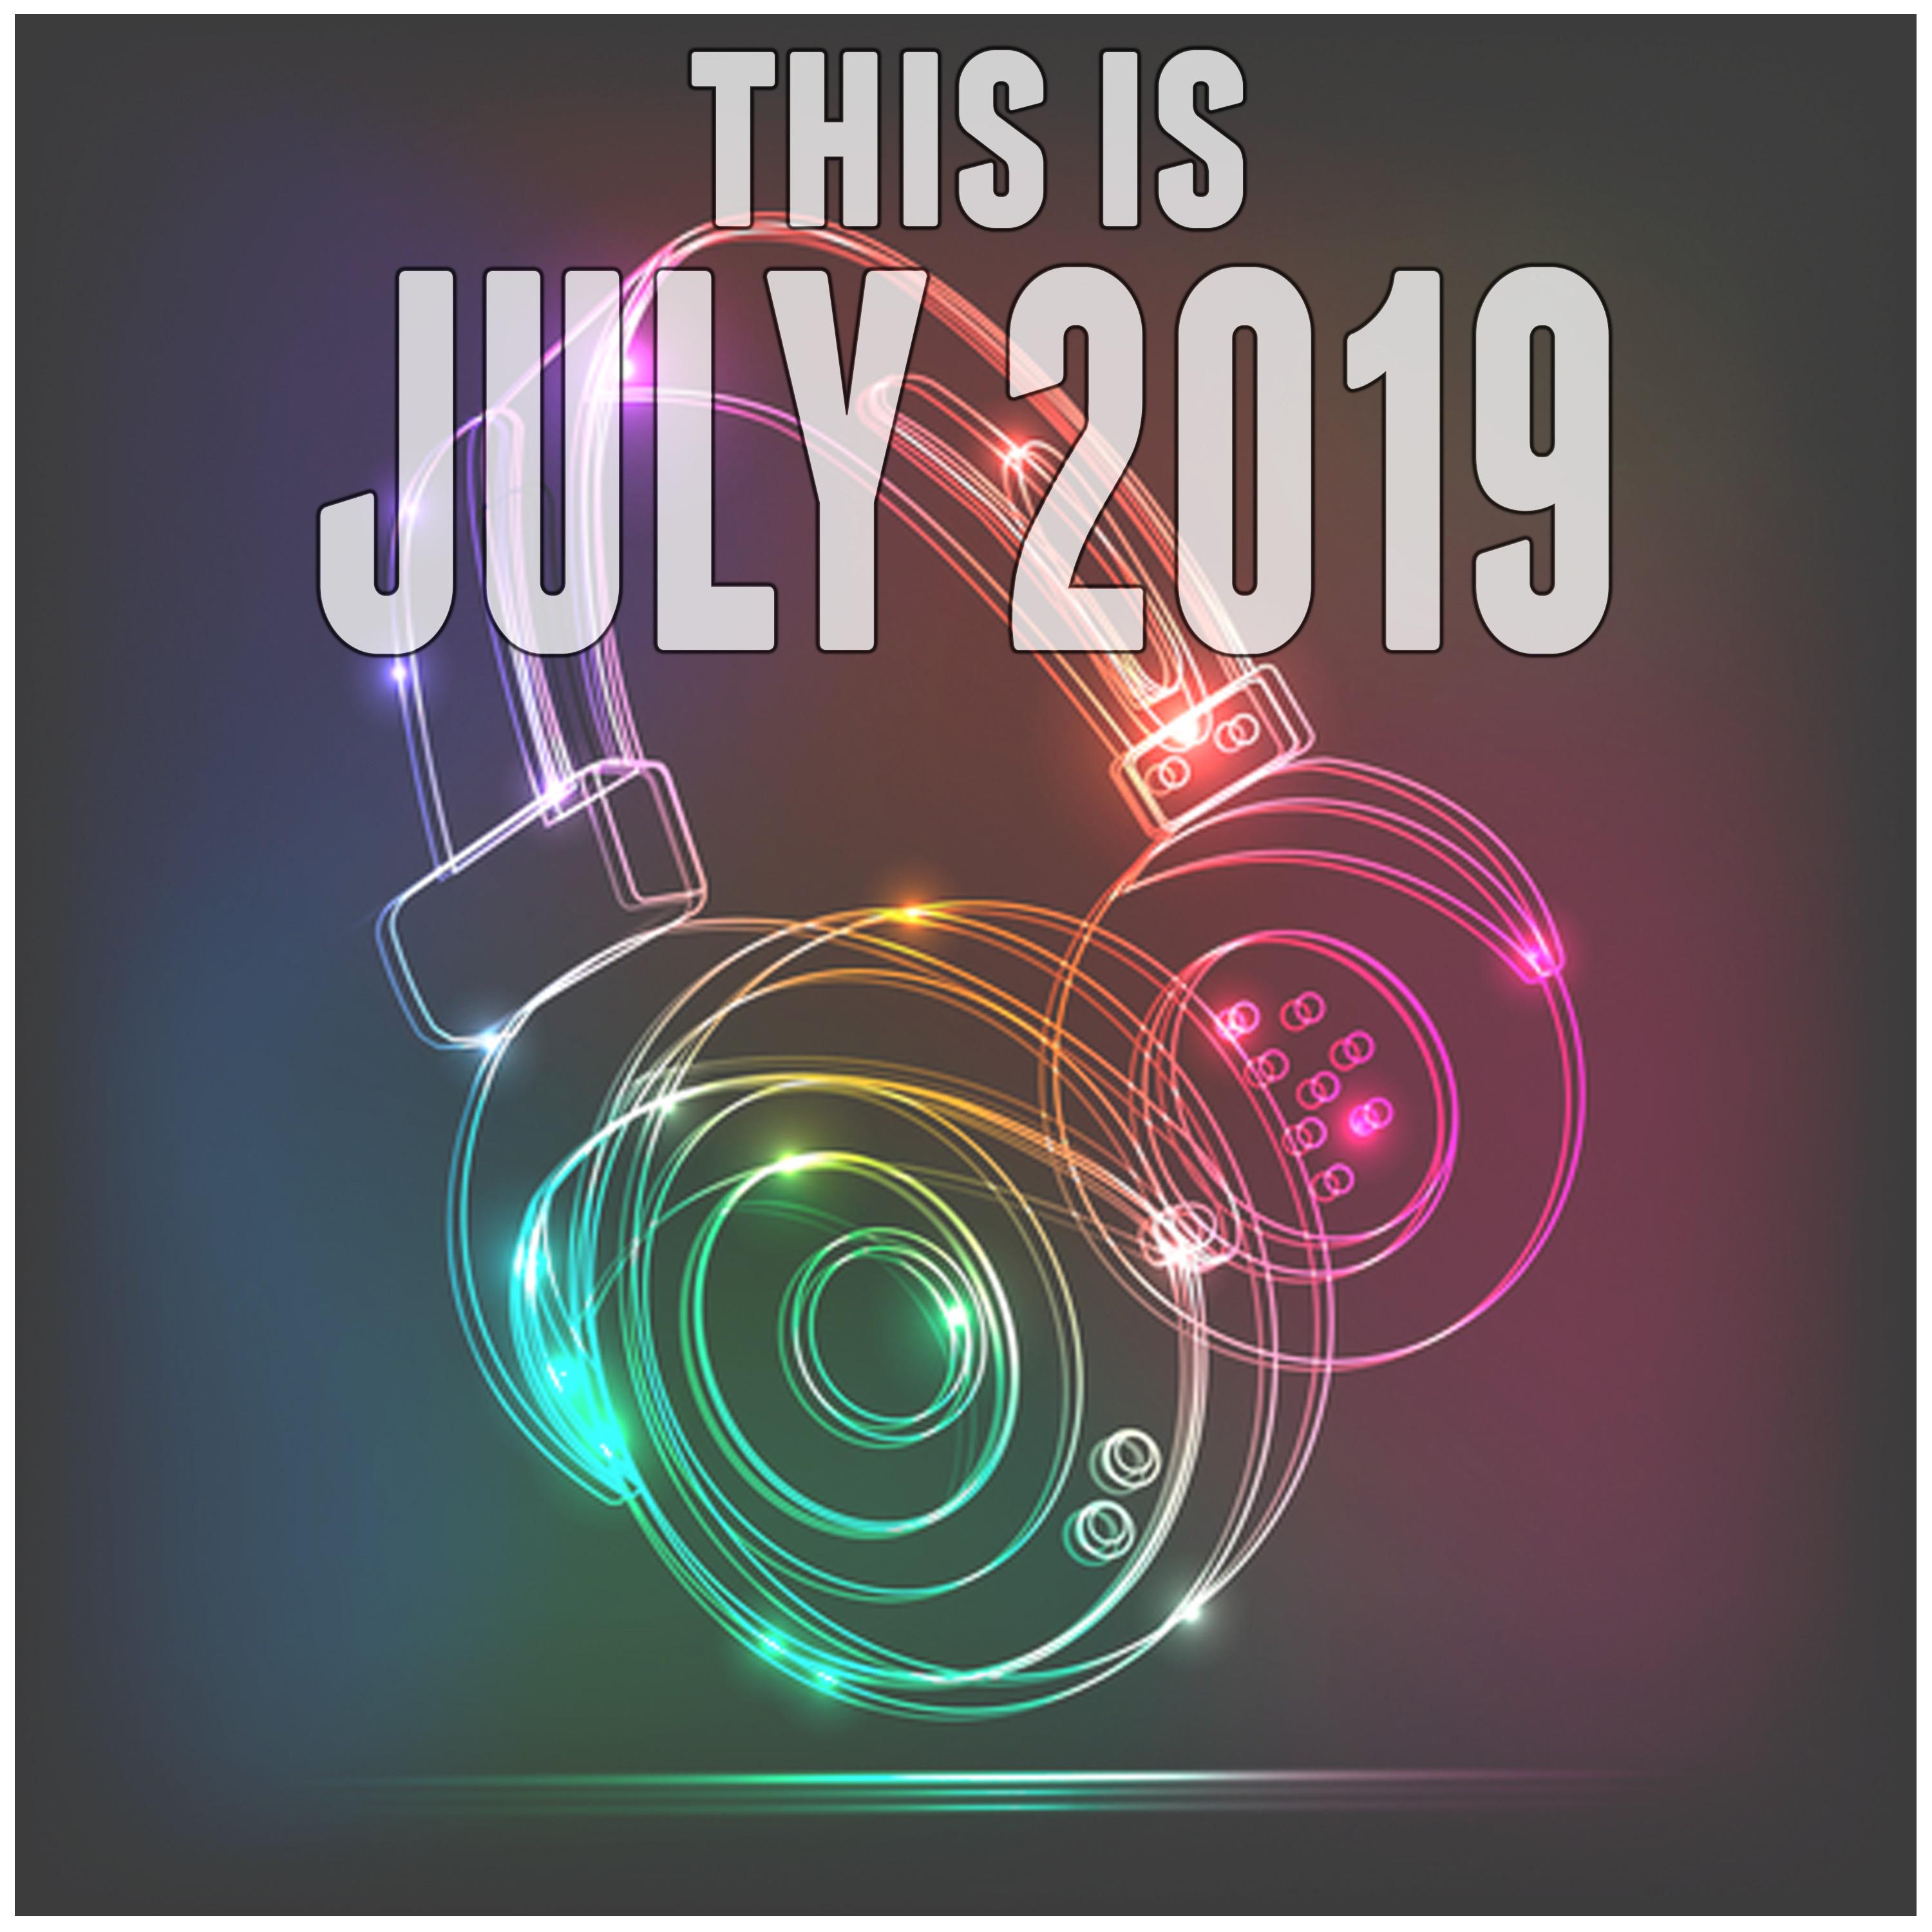 This Is July 2019